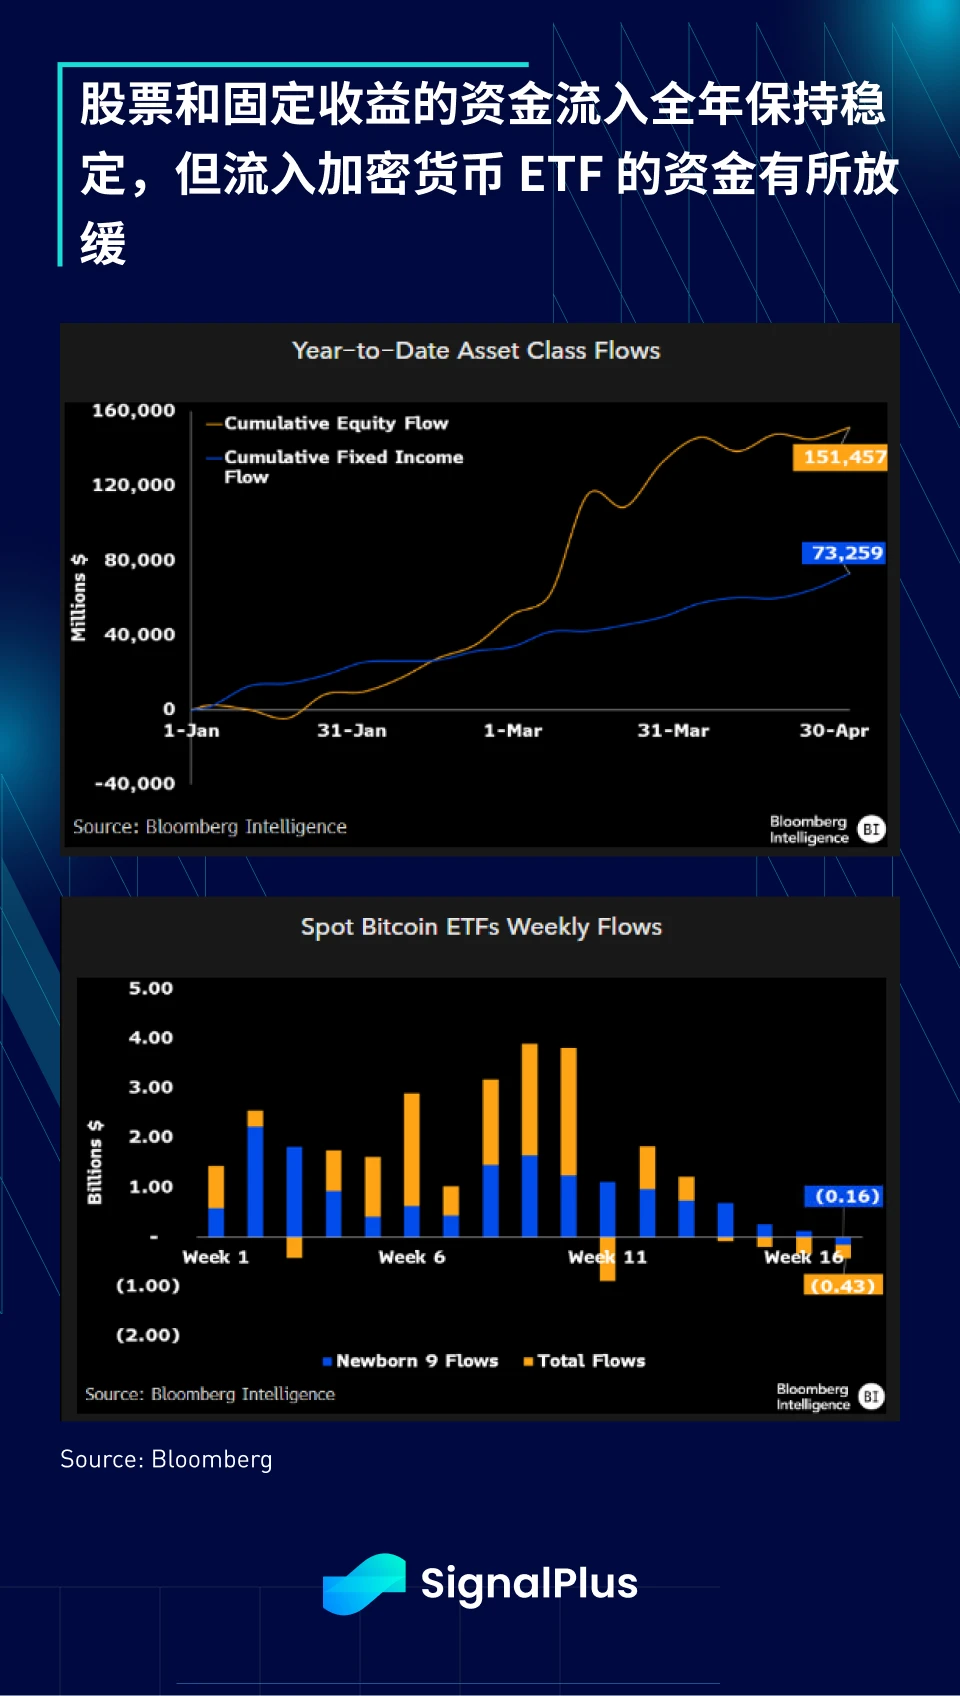 SignalPlus Macro Analysis (20240508): ETF funds have experienced net outflows for three consecutive weeks